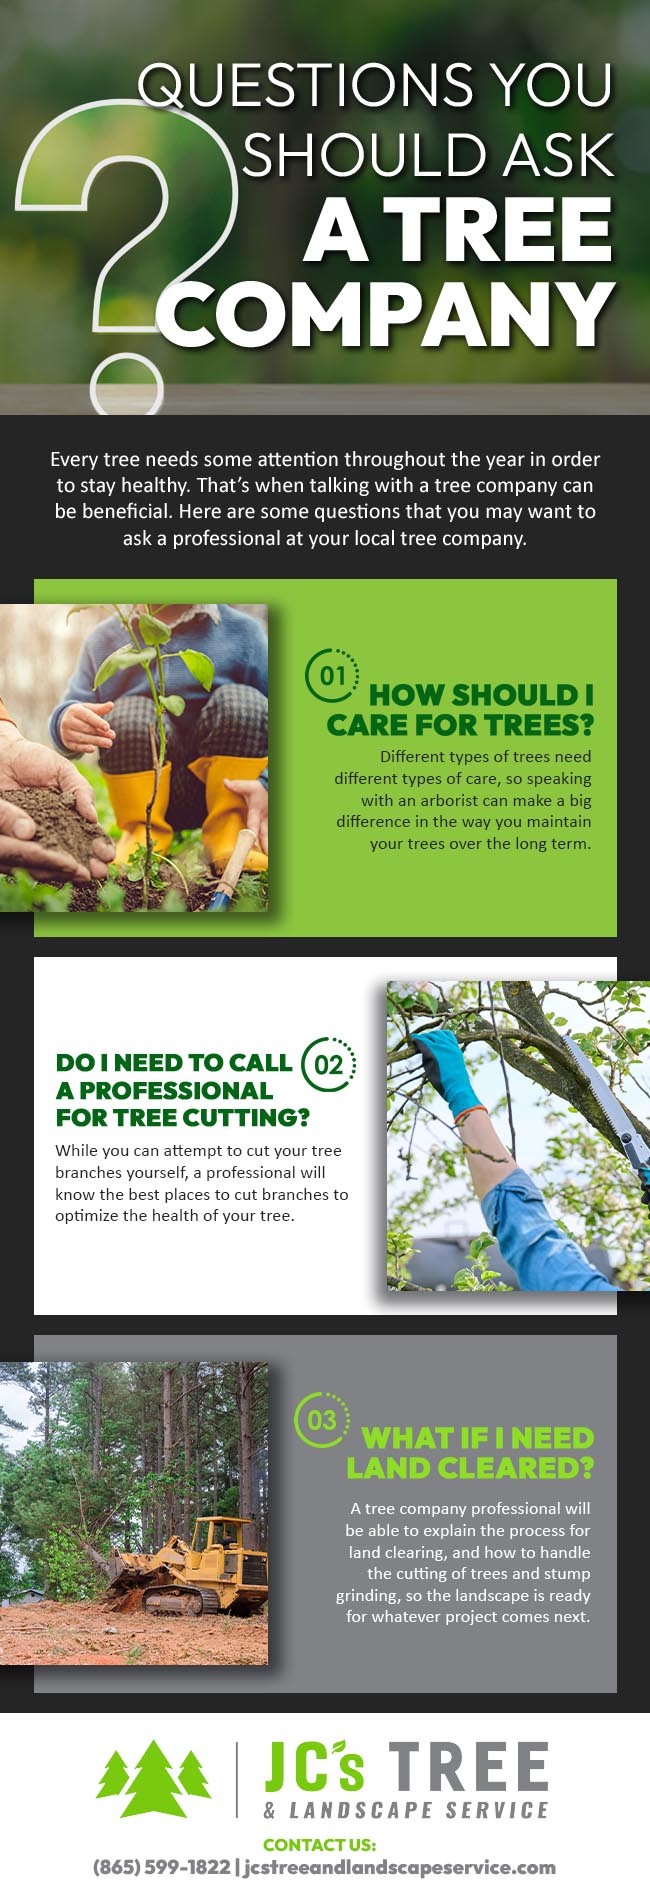 Questions You Should Ask a Tree Company